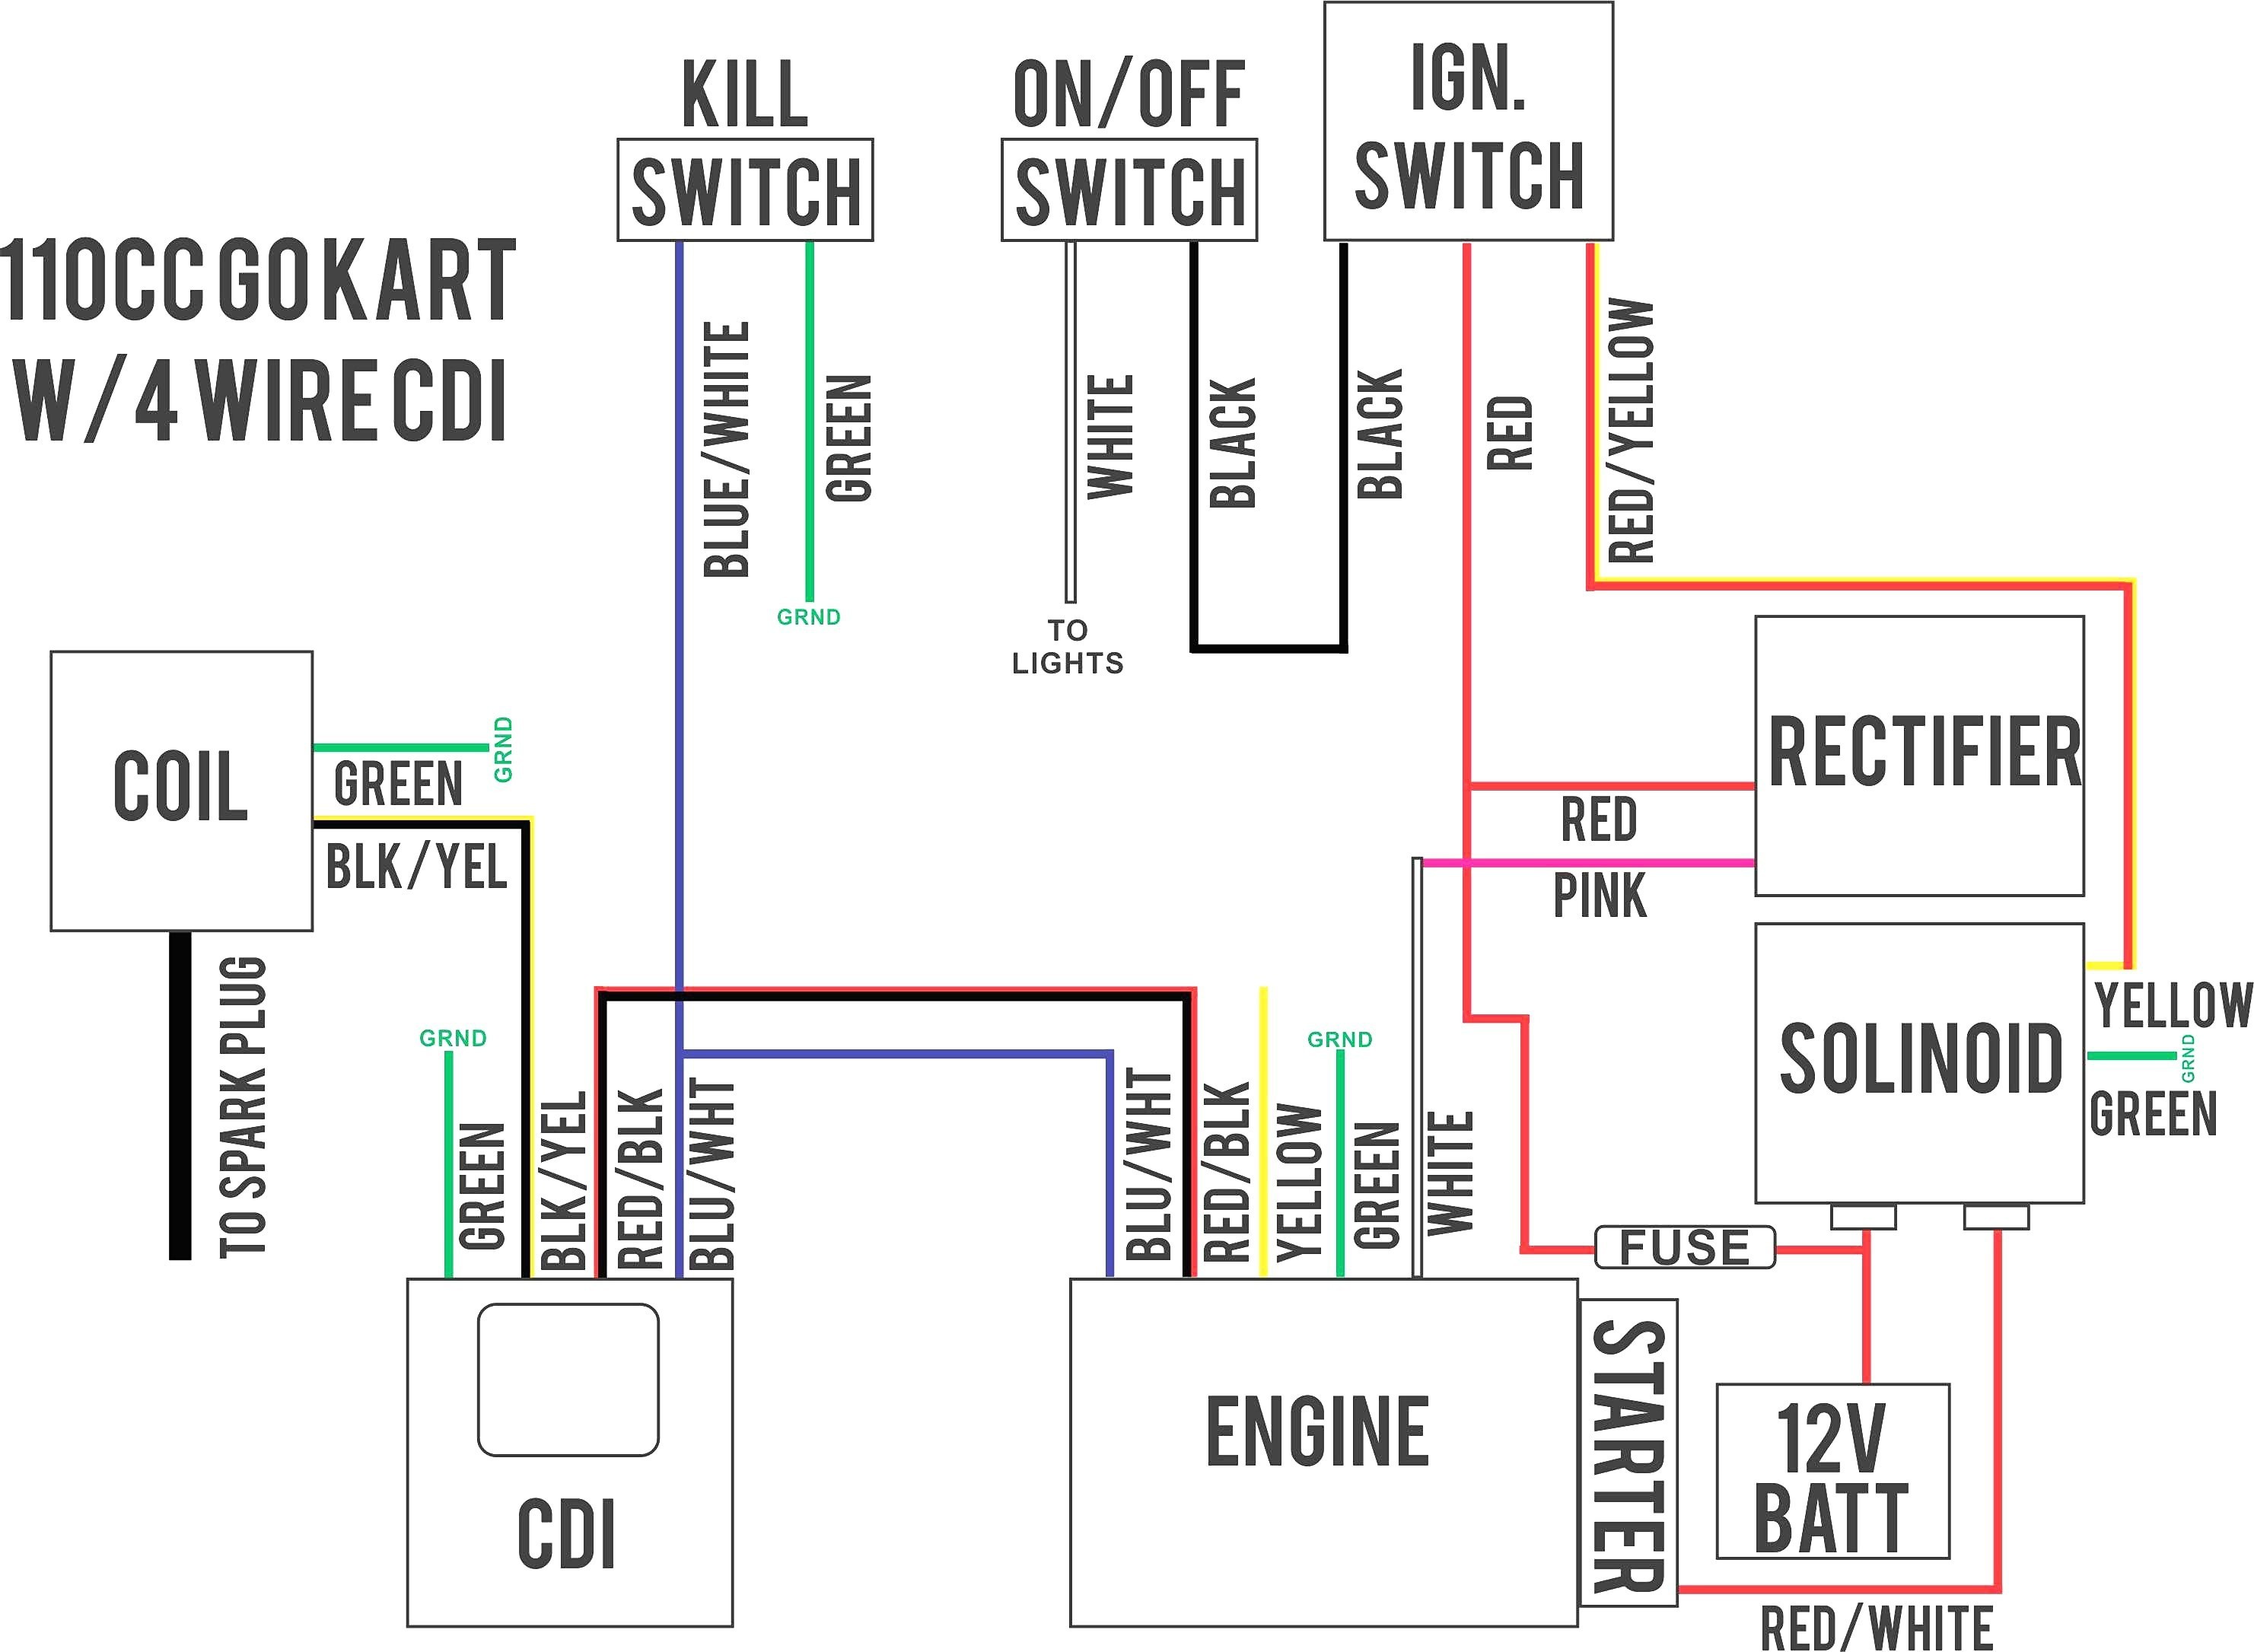 Wiring Diagram for Ignition Save Typical Ignition Switch Wiring Diagram Gas Scooter Electrical